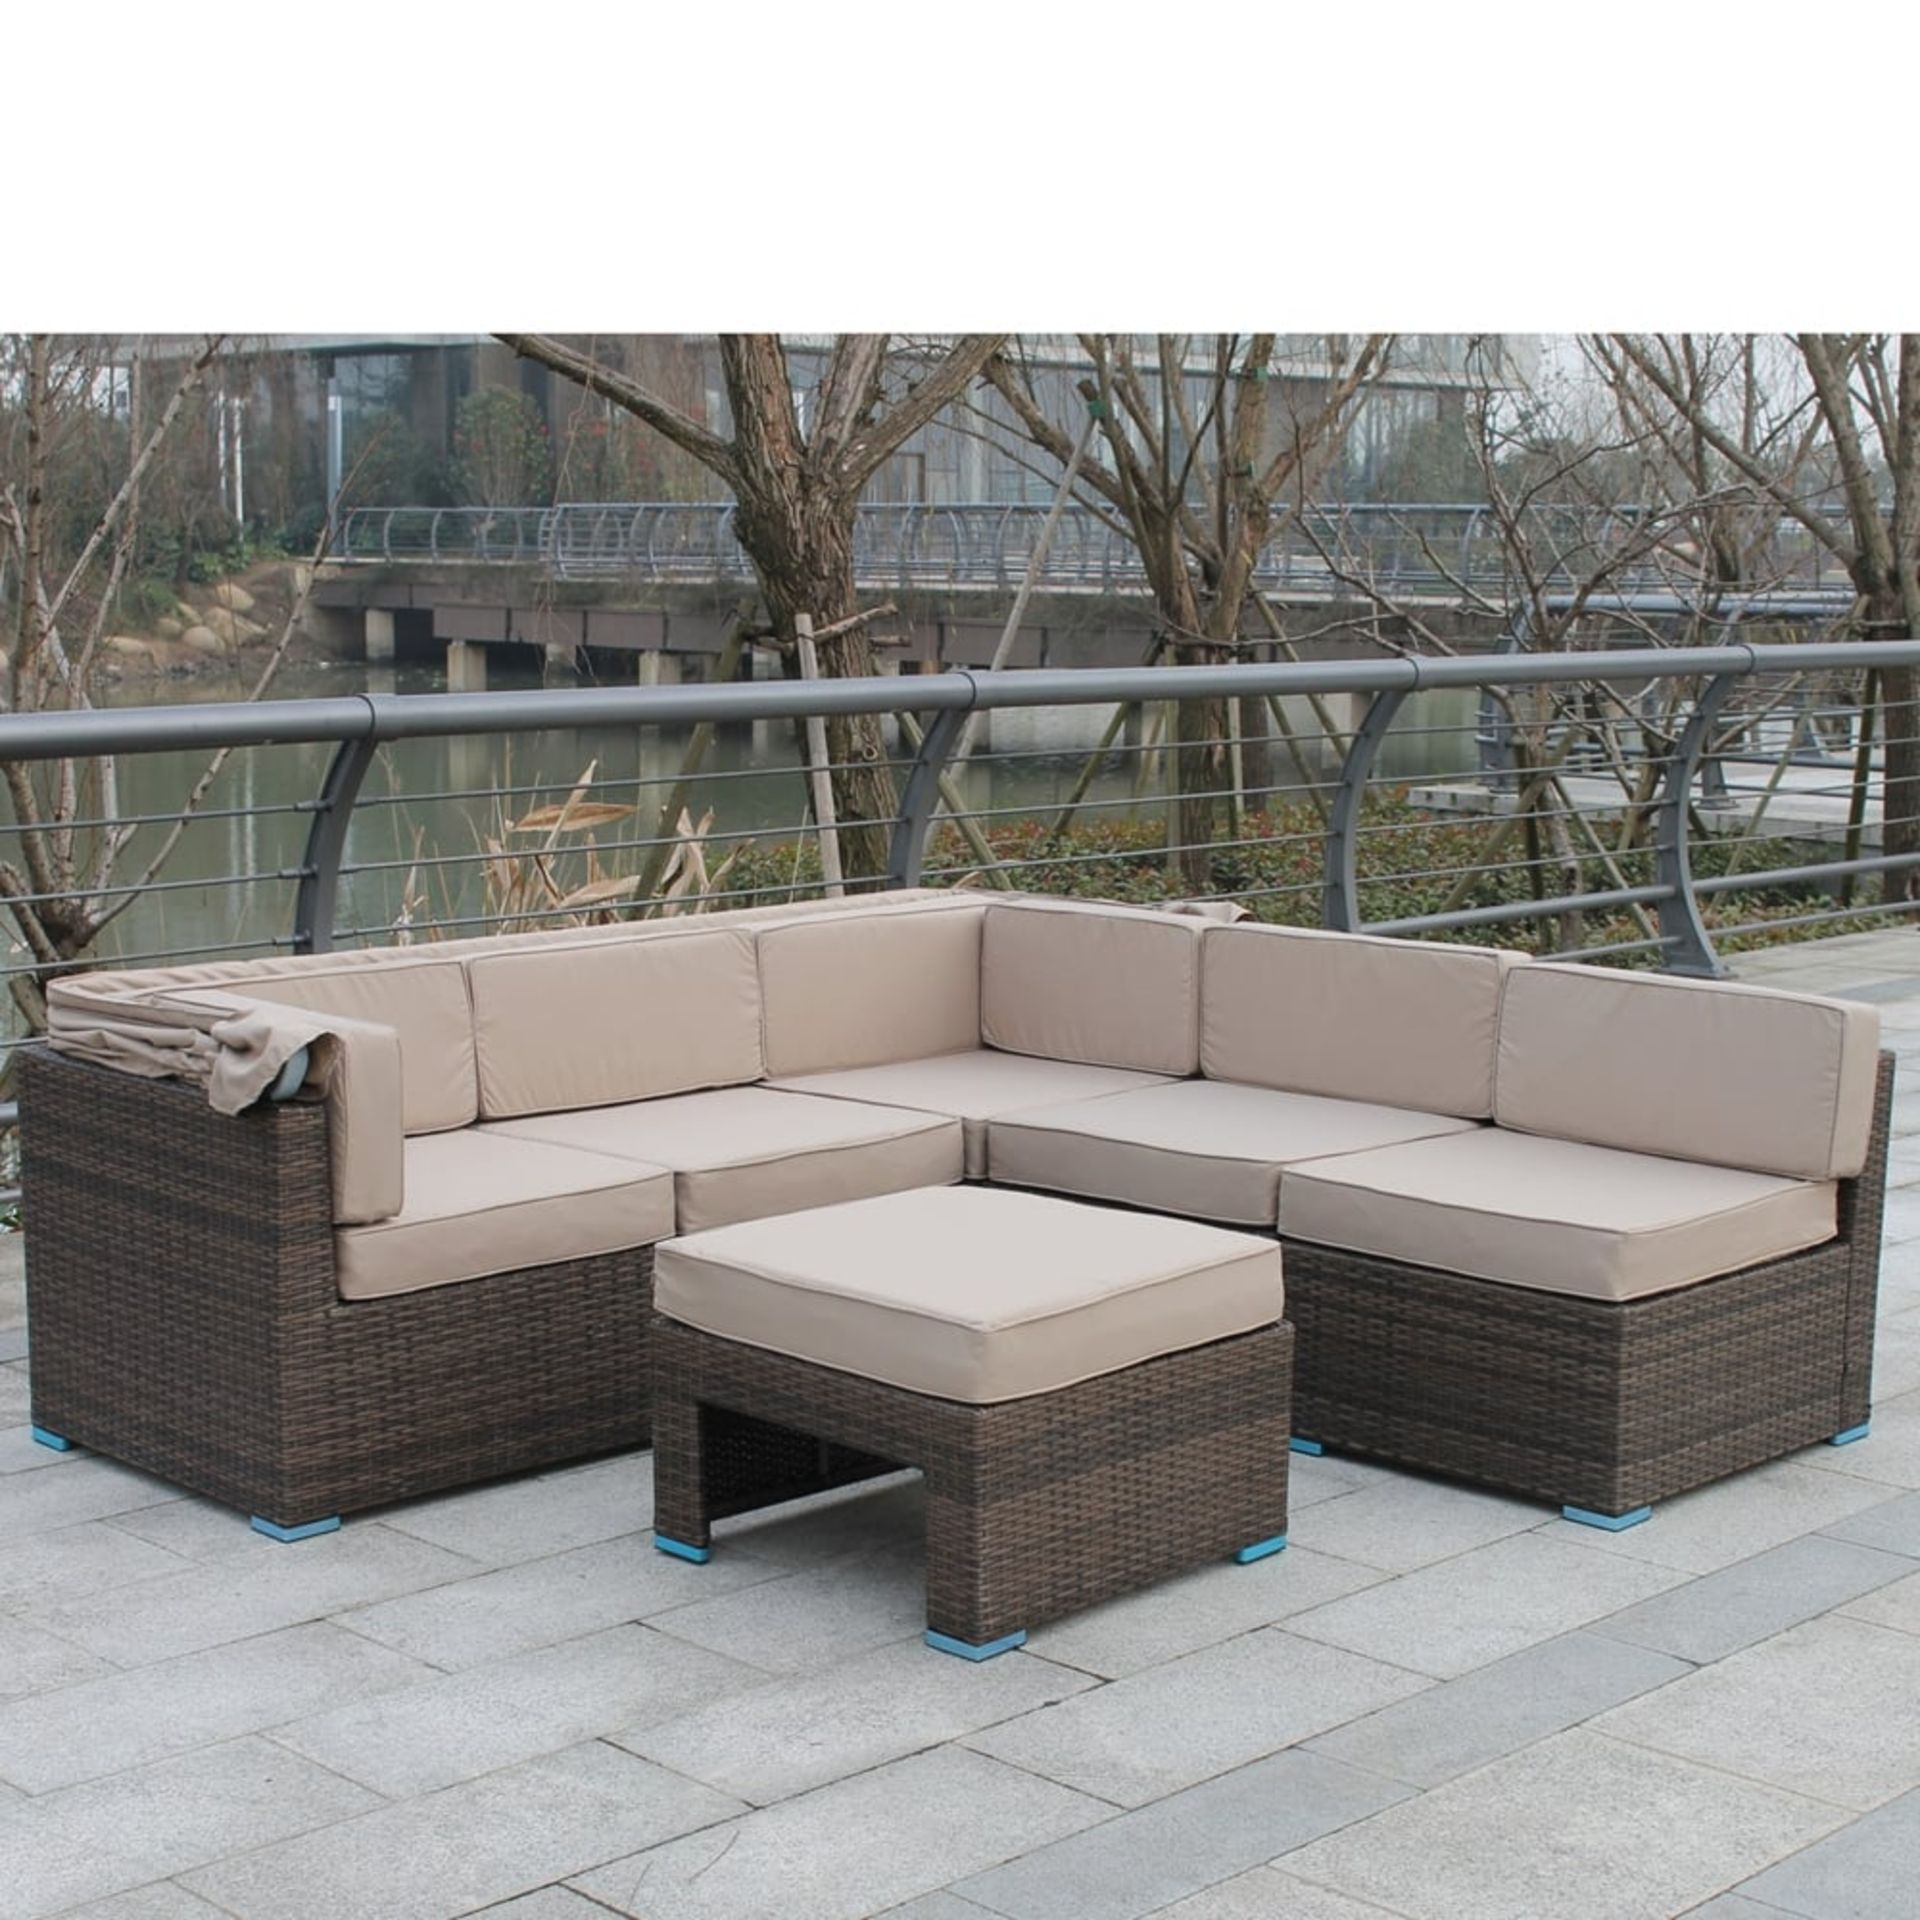 Altrincham Five Seat Rattan Sofa Set with Table new and boxed multi brown pu rattan.